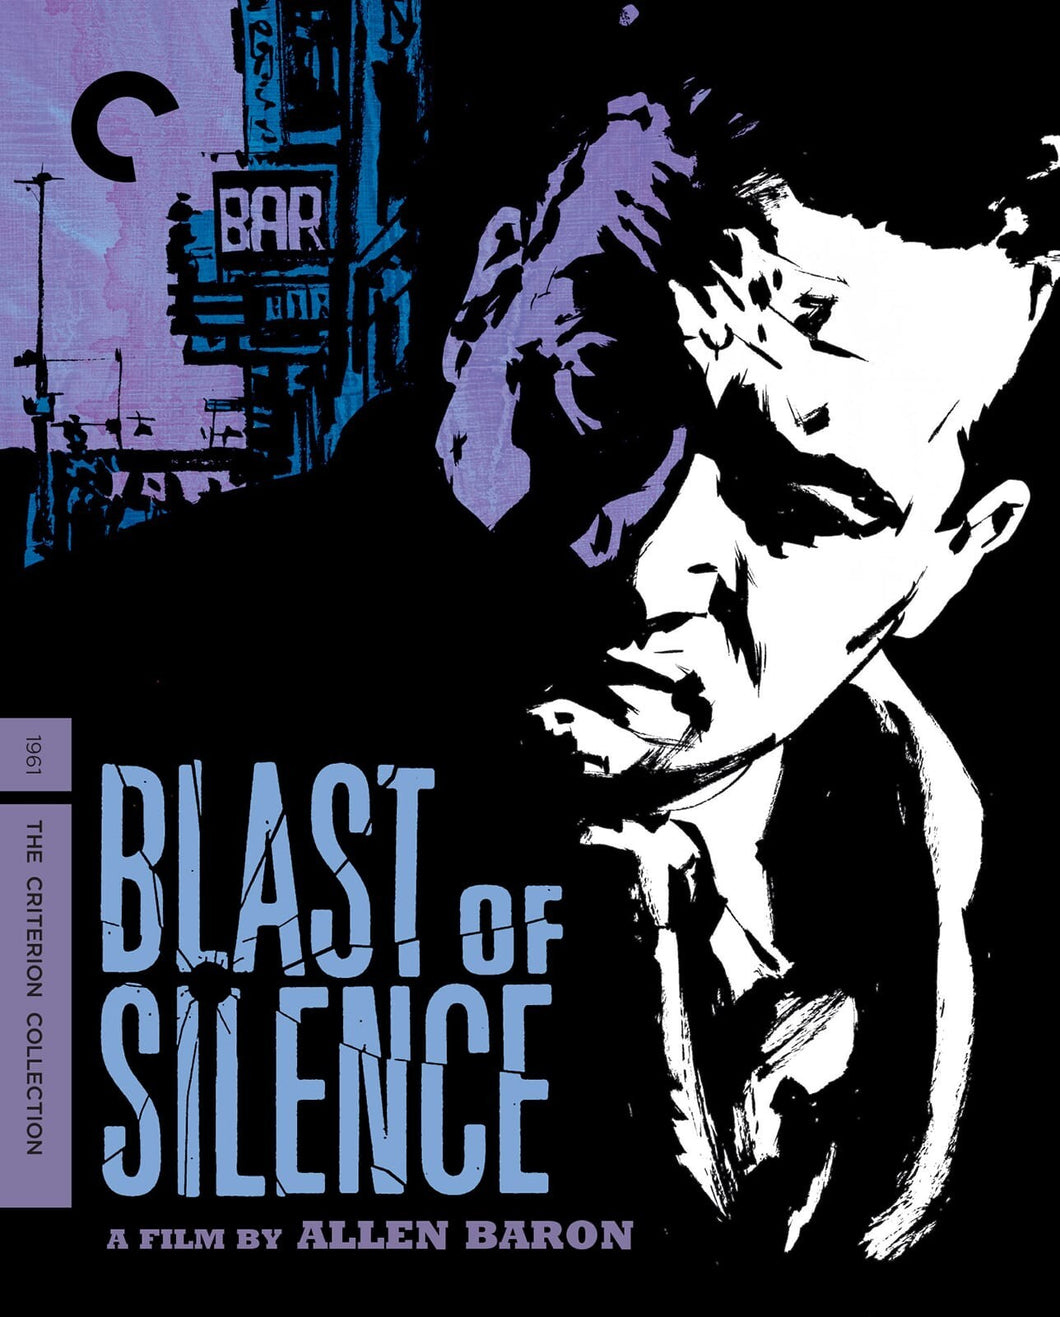 Blast of Silence (1961) - front cover